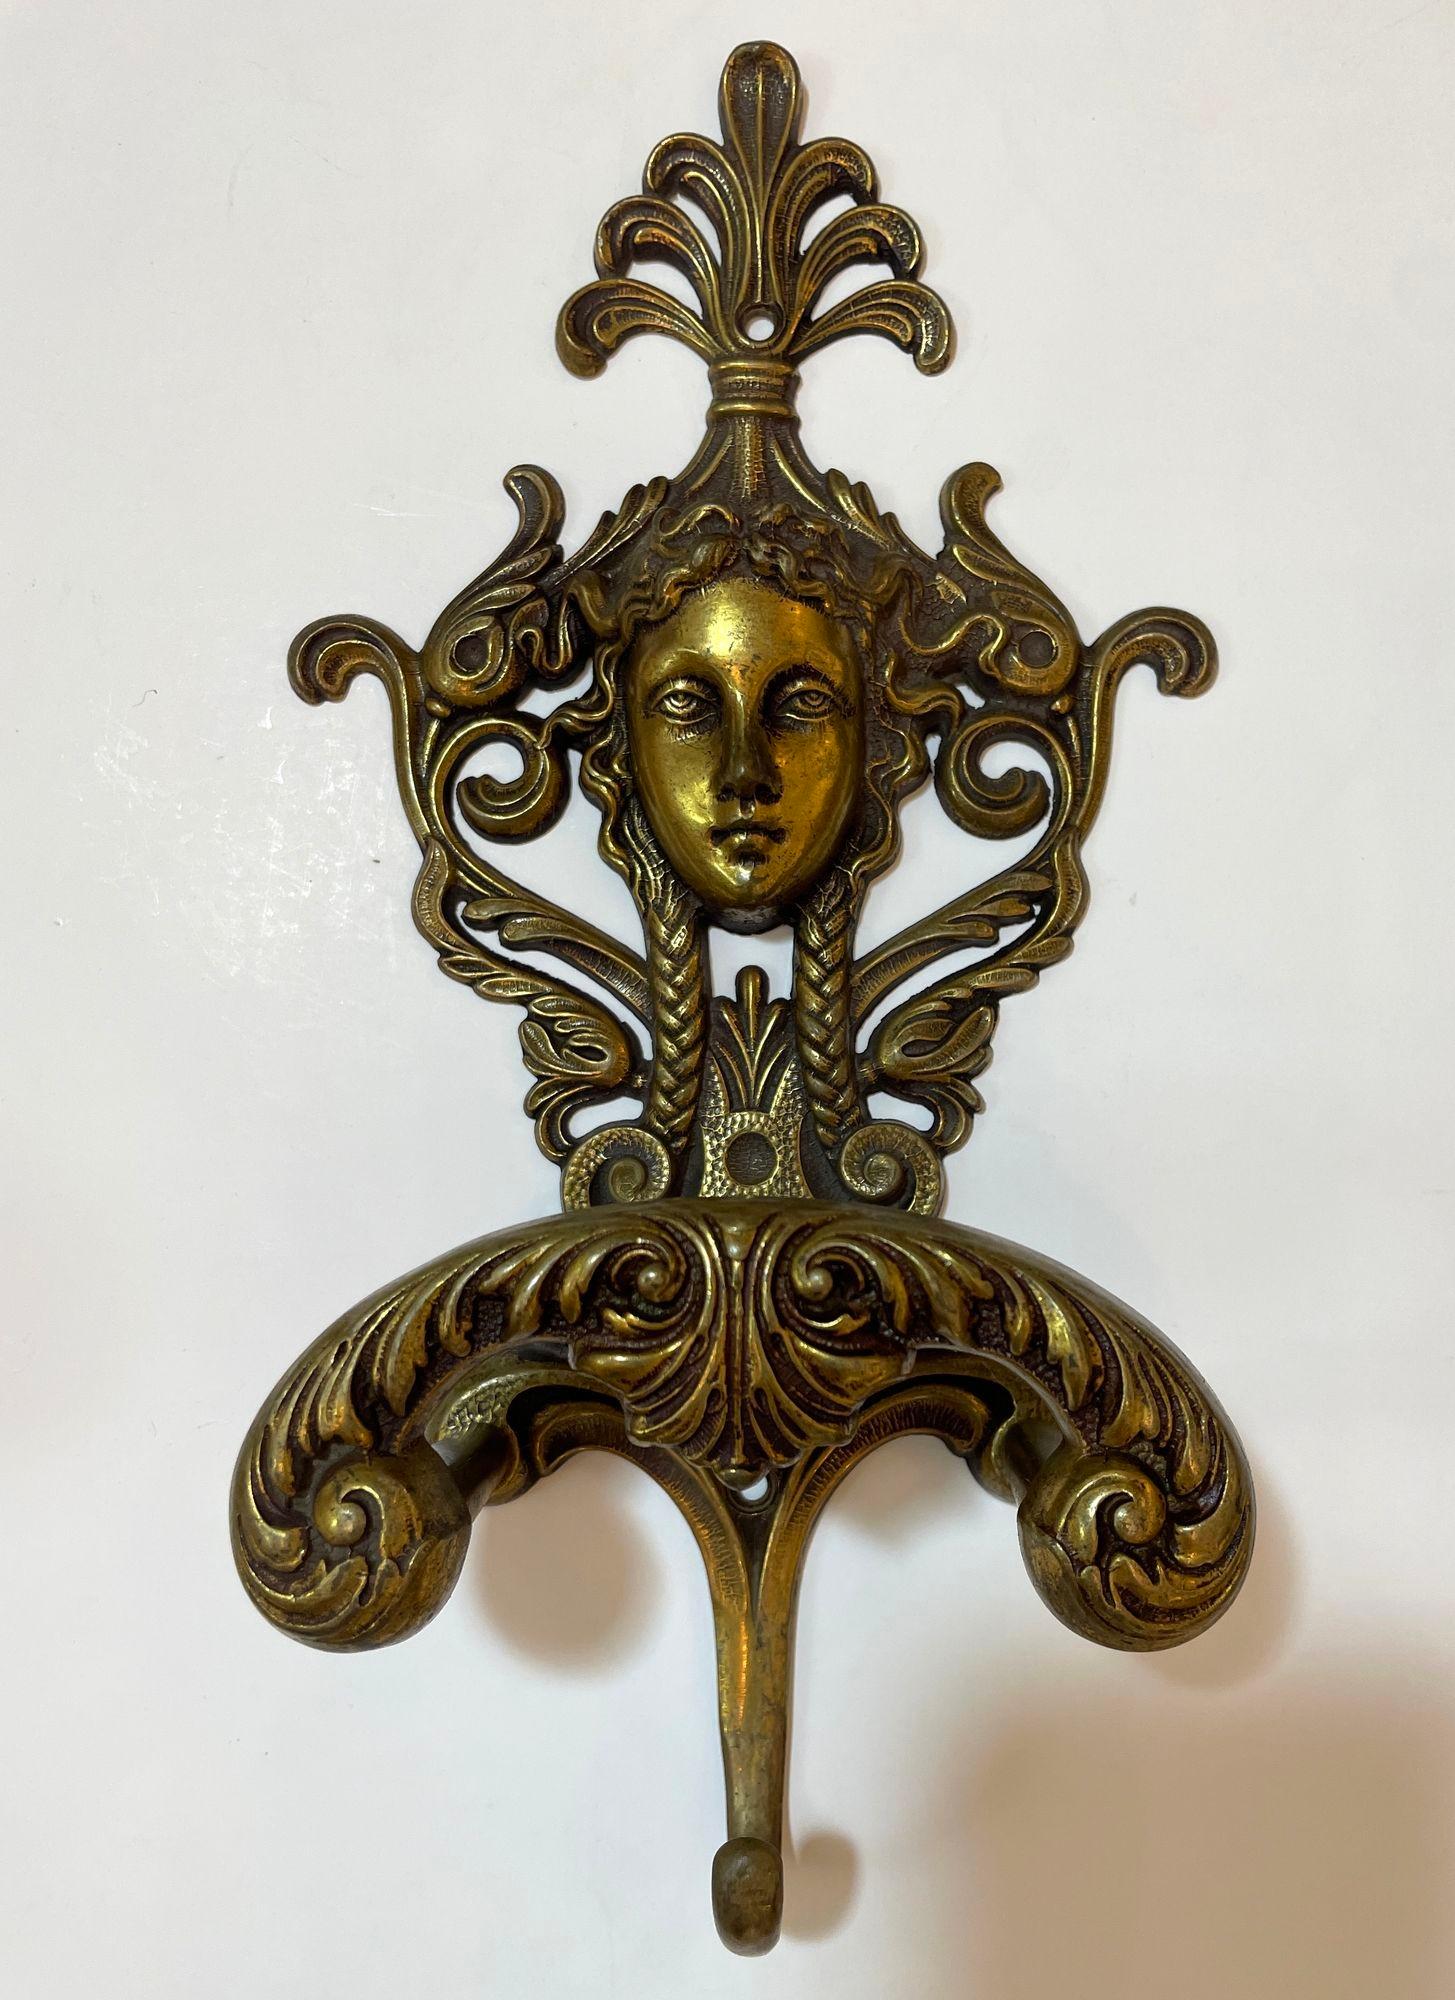 Baroque Antique Ornate Italian Figural Architectural Cast Brass Wall Hook Decor Set of 3 For Sale